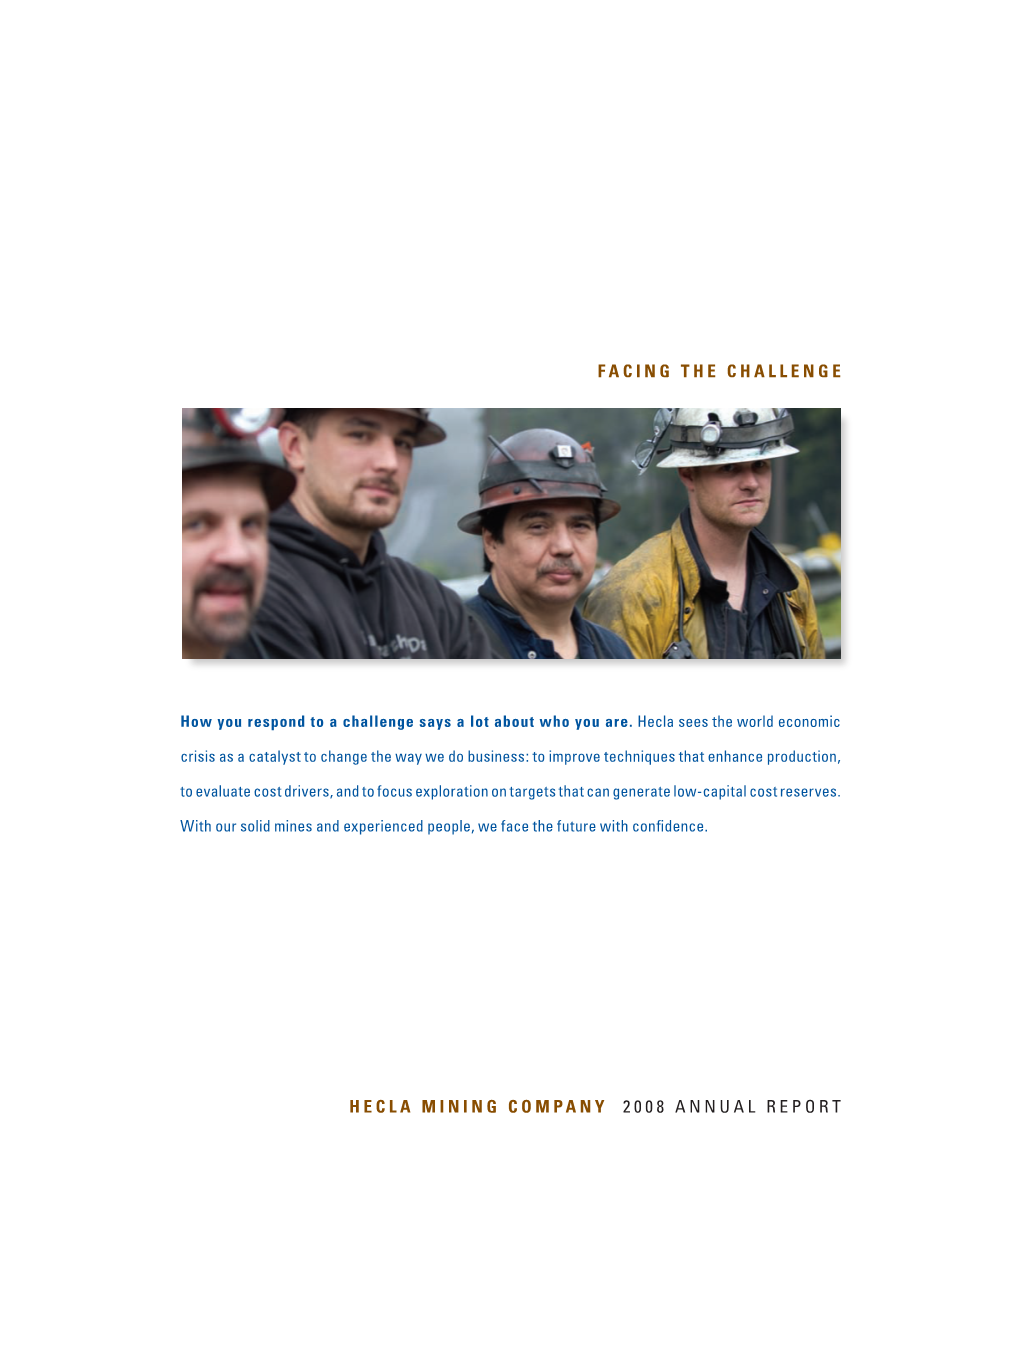 Hecla Mining Company 2008 Annual Report Facing The